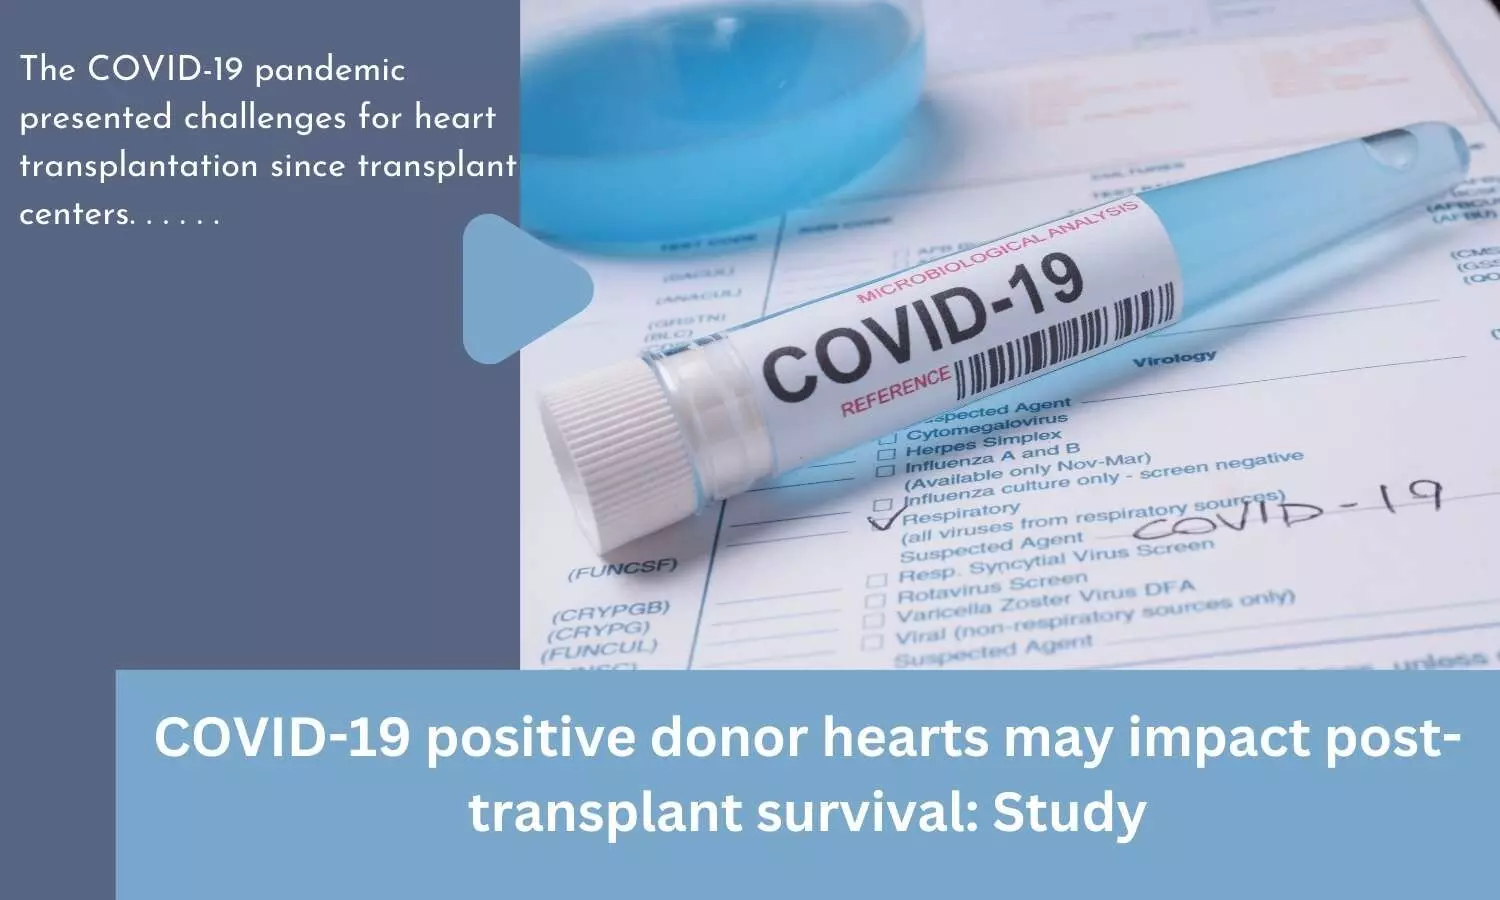 COVID-19 positive donor hearts may impact post-transplant survival: Study